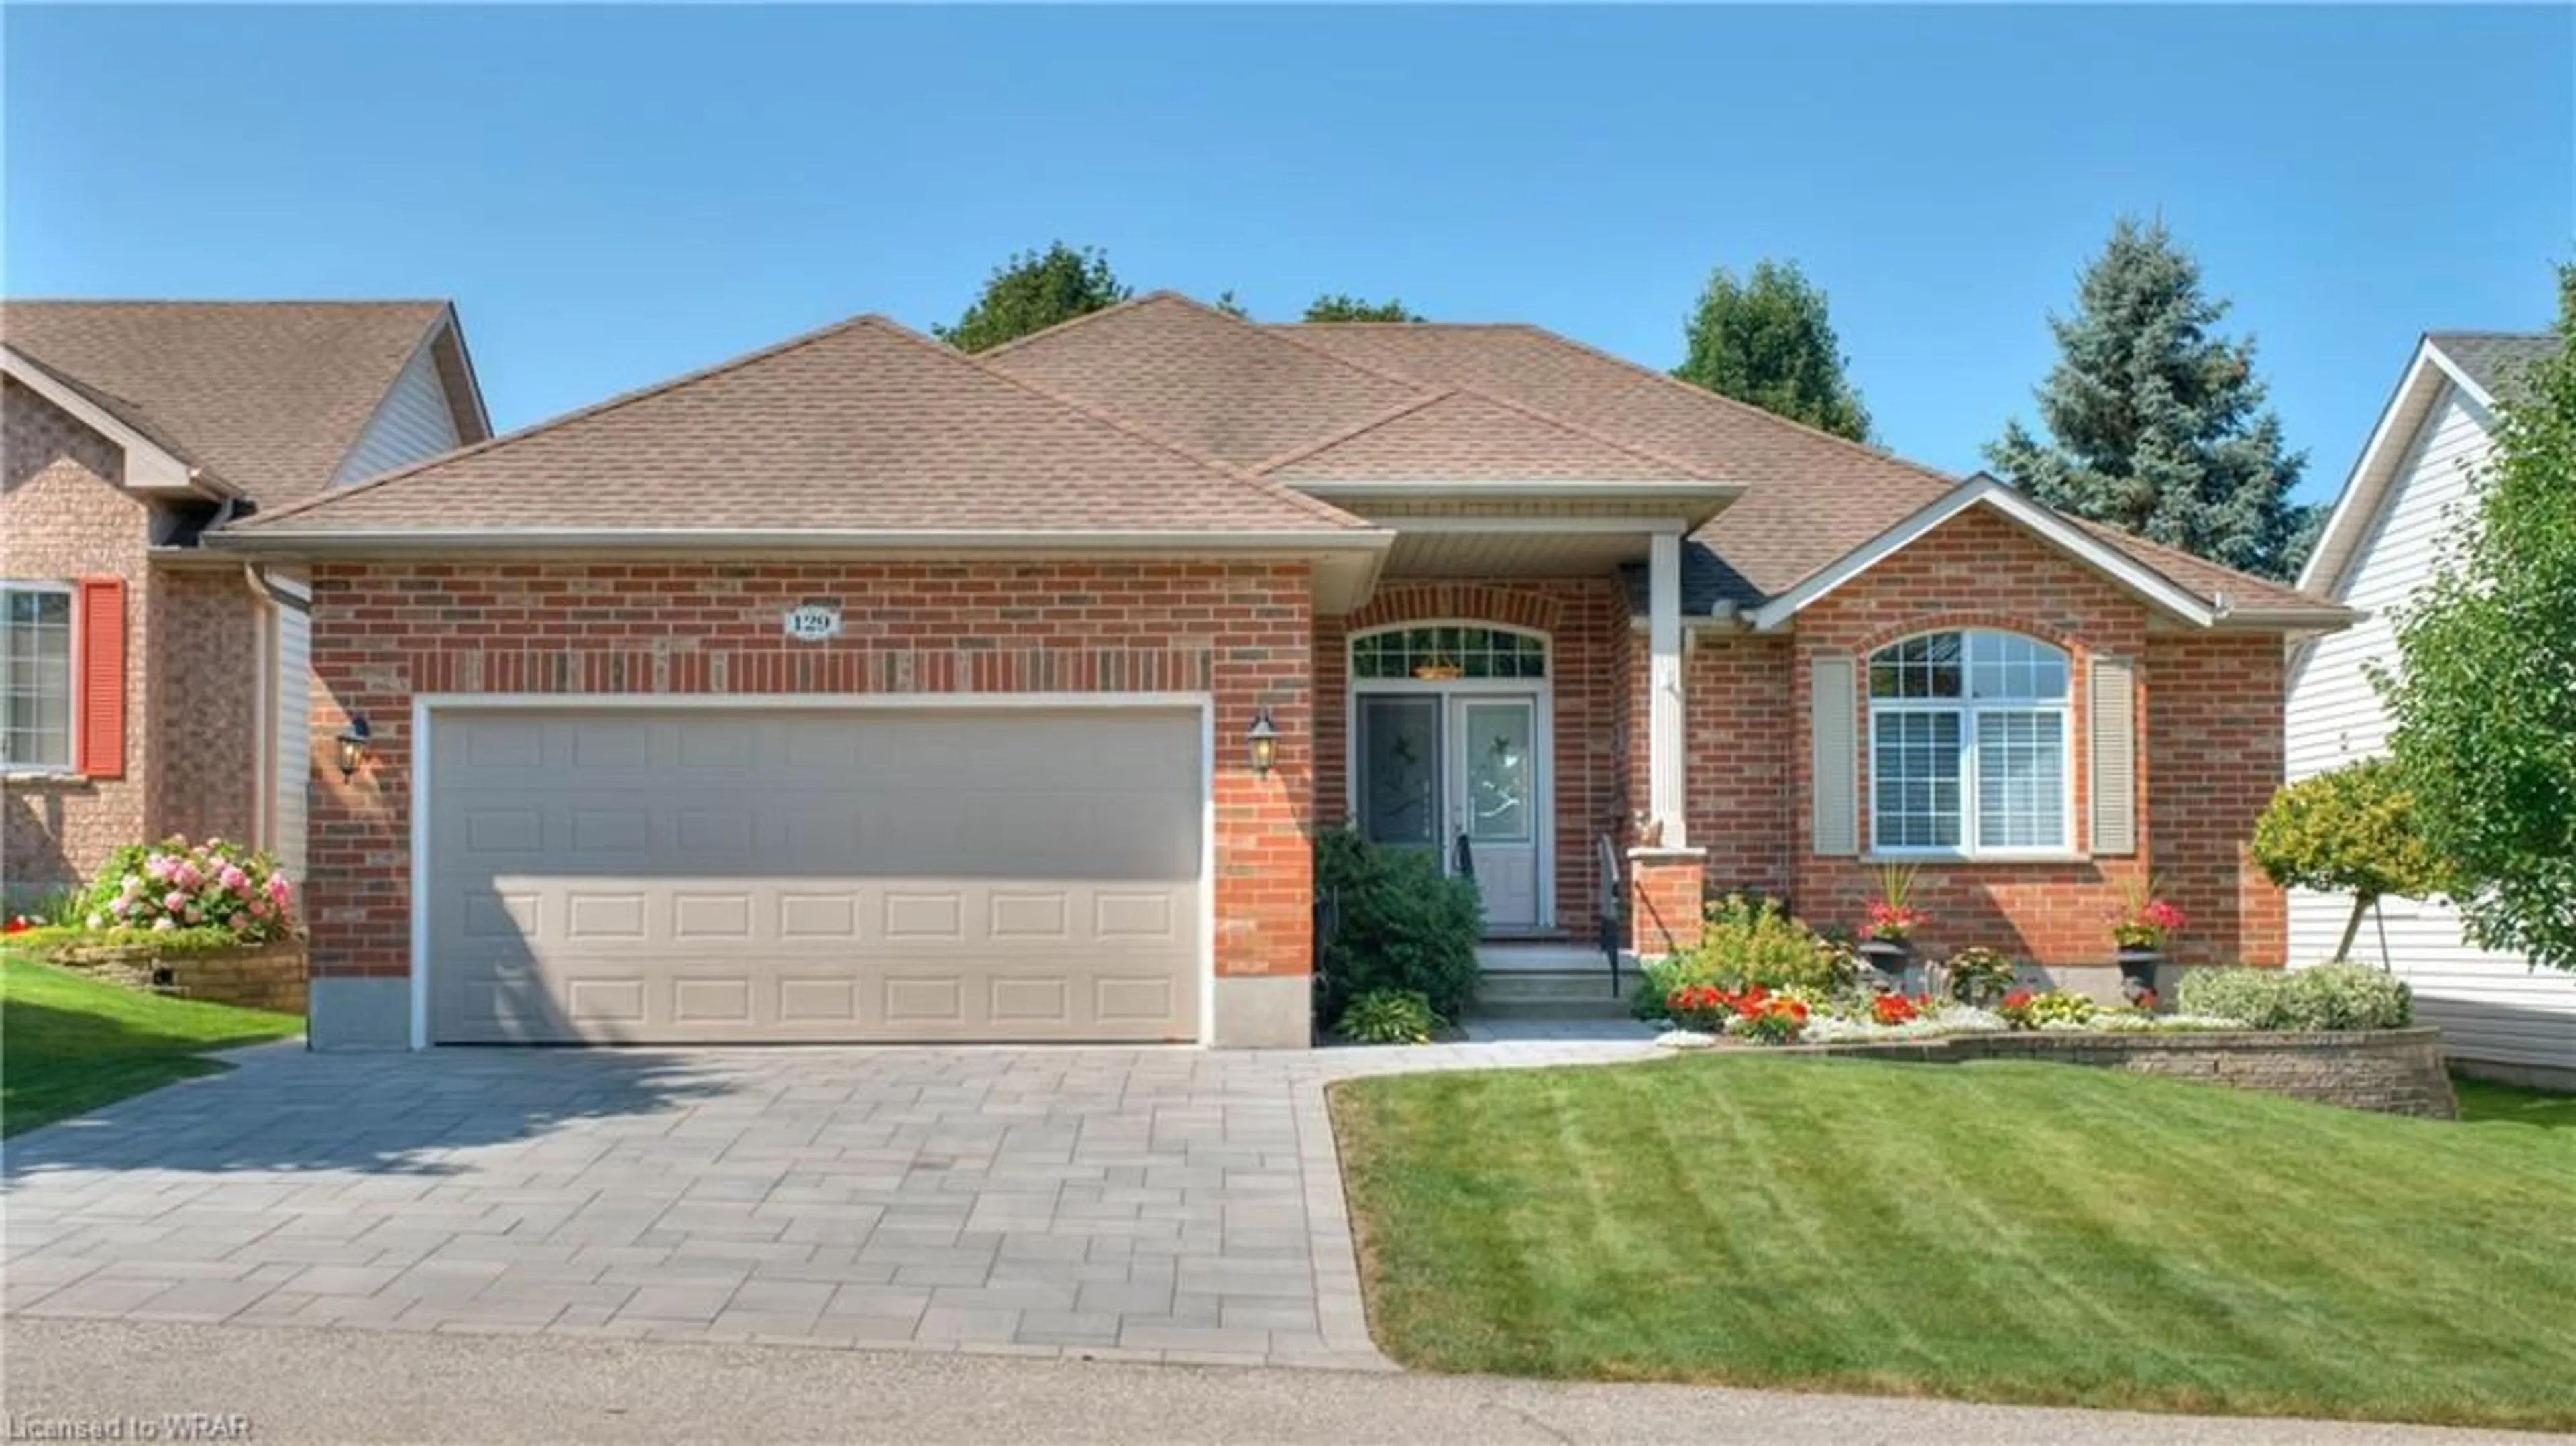 Home with brick exterior material for 129 Golf Links Dr #28, Baden Ontario N3A 3N7